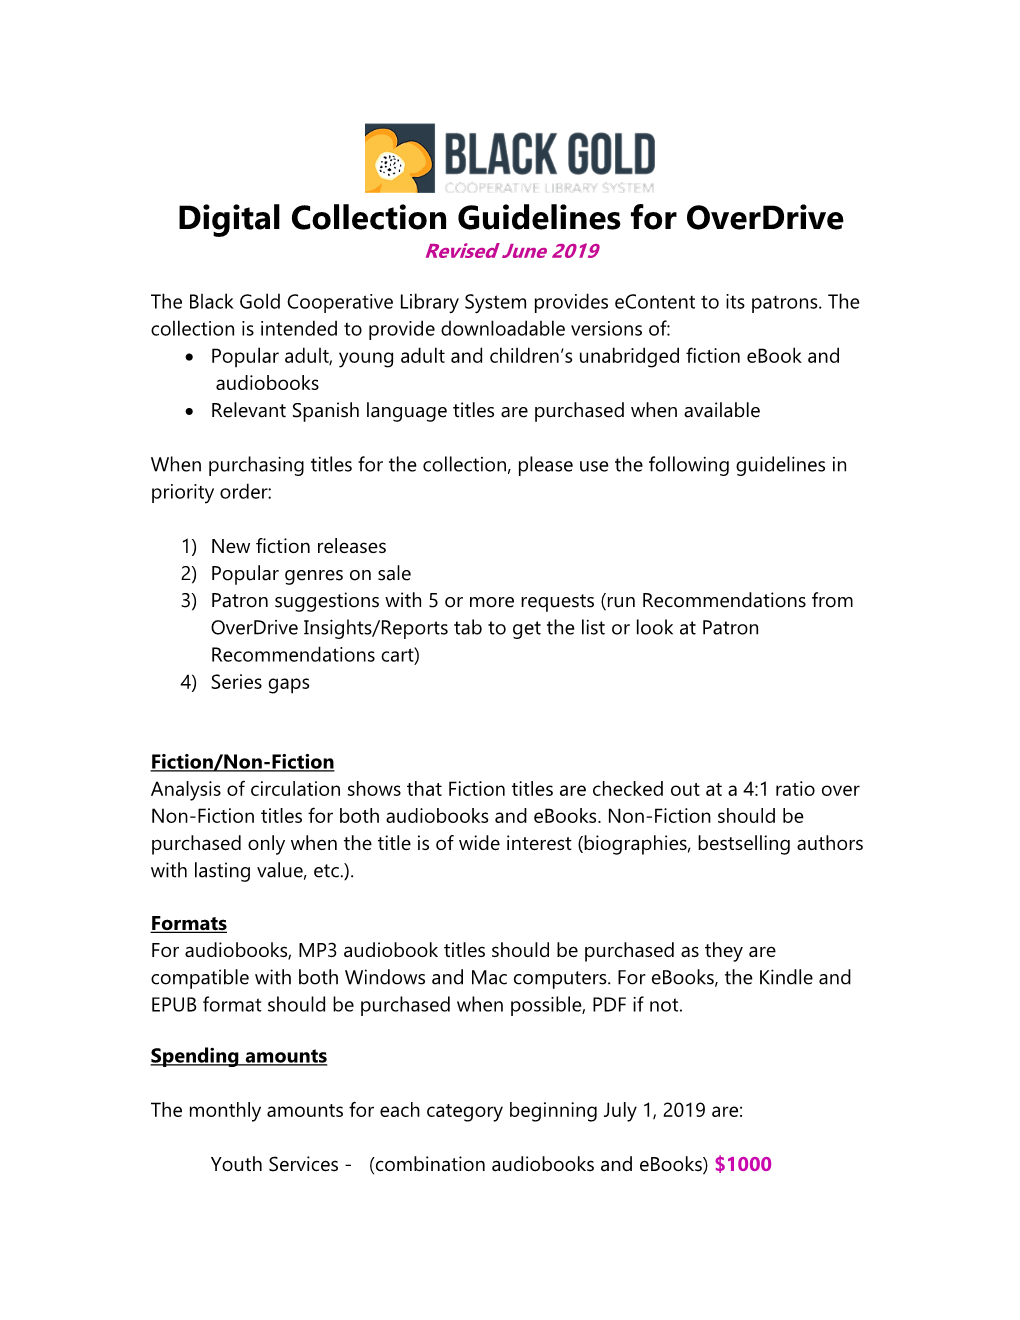 Digital Collection Guidelines for Overdrive Revised June 2019